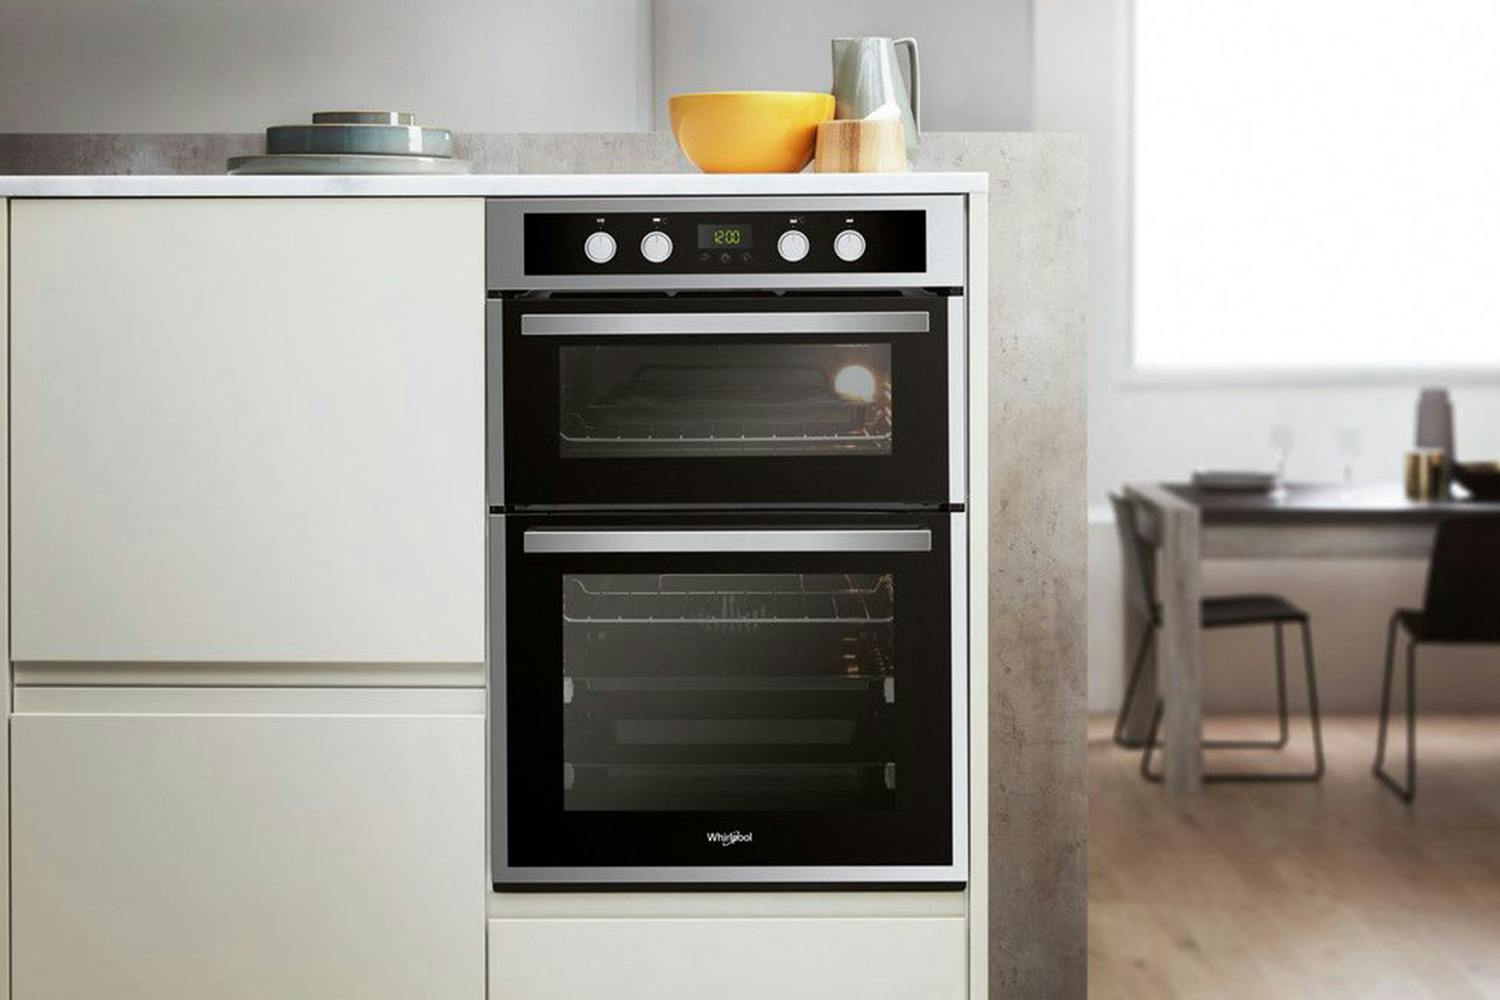 Whirlpool Electric Built-in Double Oven | AKL309IX